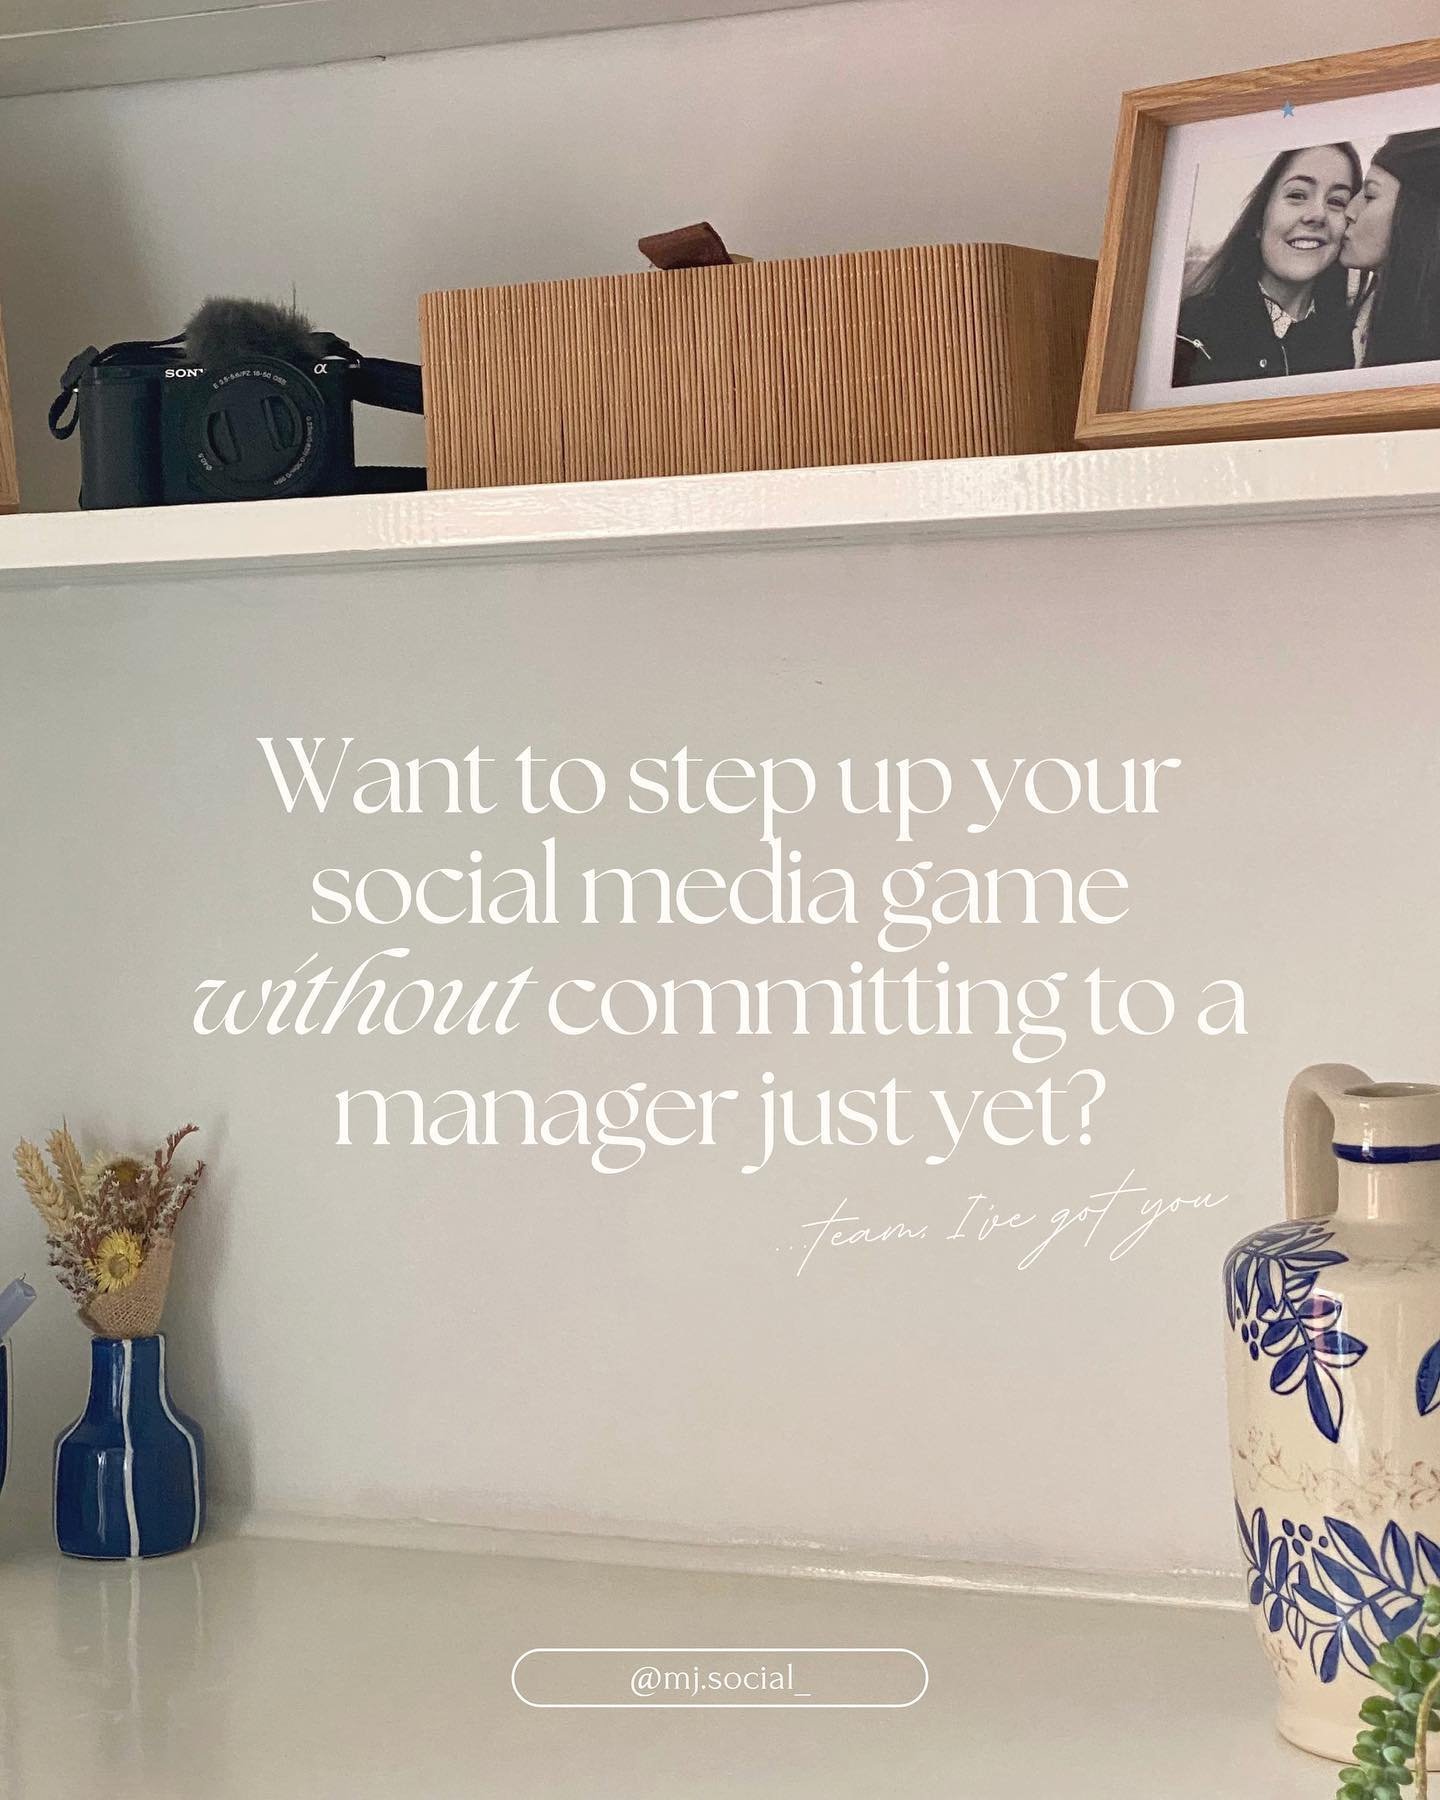 NOT every business is in a position to hire a social media manager to handle their marketing needs&hellip;But that doesn&rsquo;t mean that their marketing should be S***!

I know EXACTLY what it&rsquo;s like to be running a business and spinning ALL 